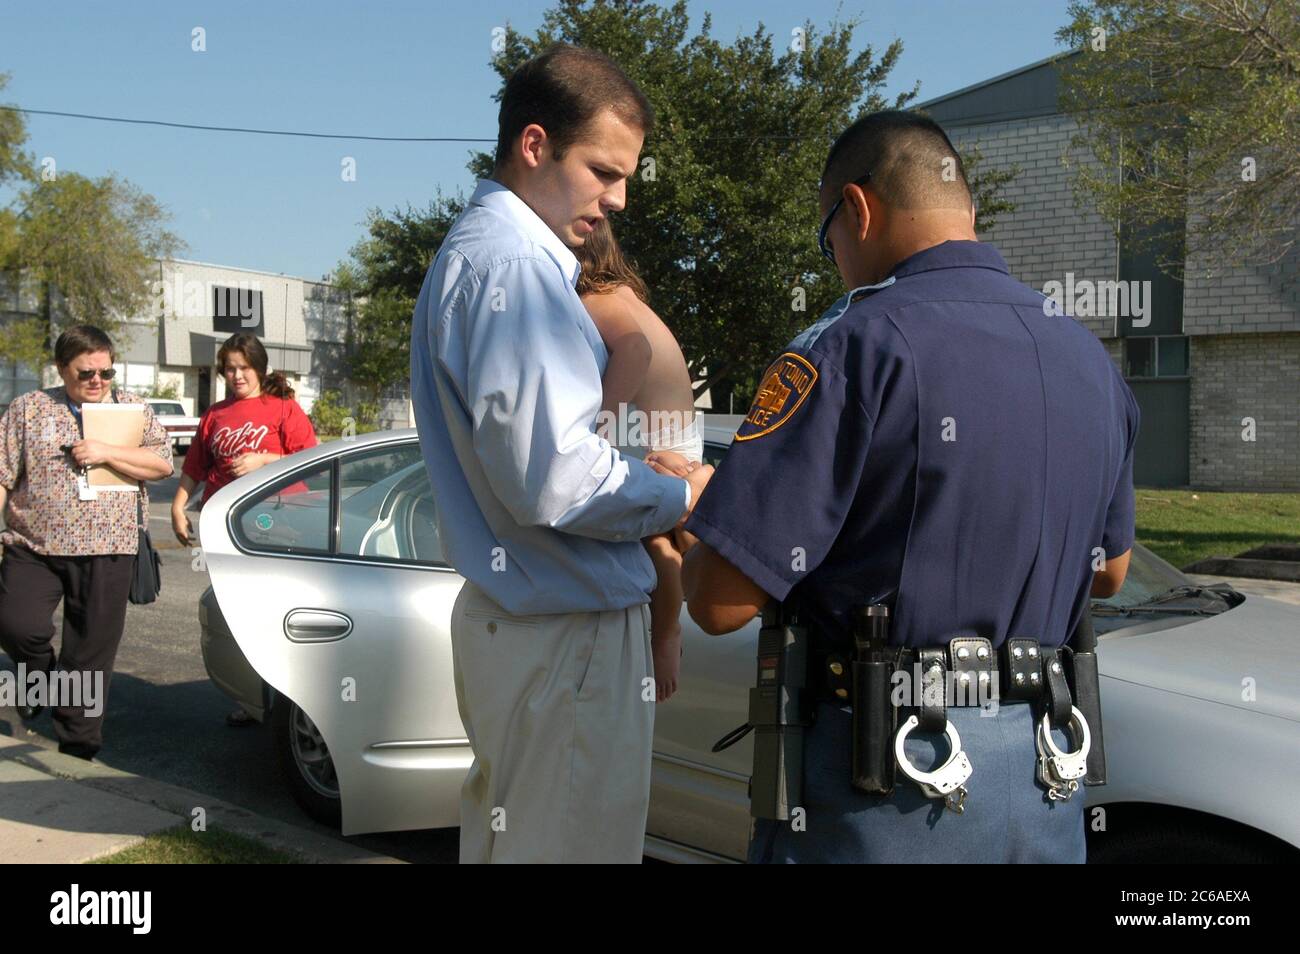 San Antonio, Texas August 7-8, 2003: Officer Ben Sigala assists Children's Protective Services (CPS) with the removal of a baby and mother from a home. No Releases available. ©Bob Daemmrich Stock Photo